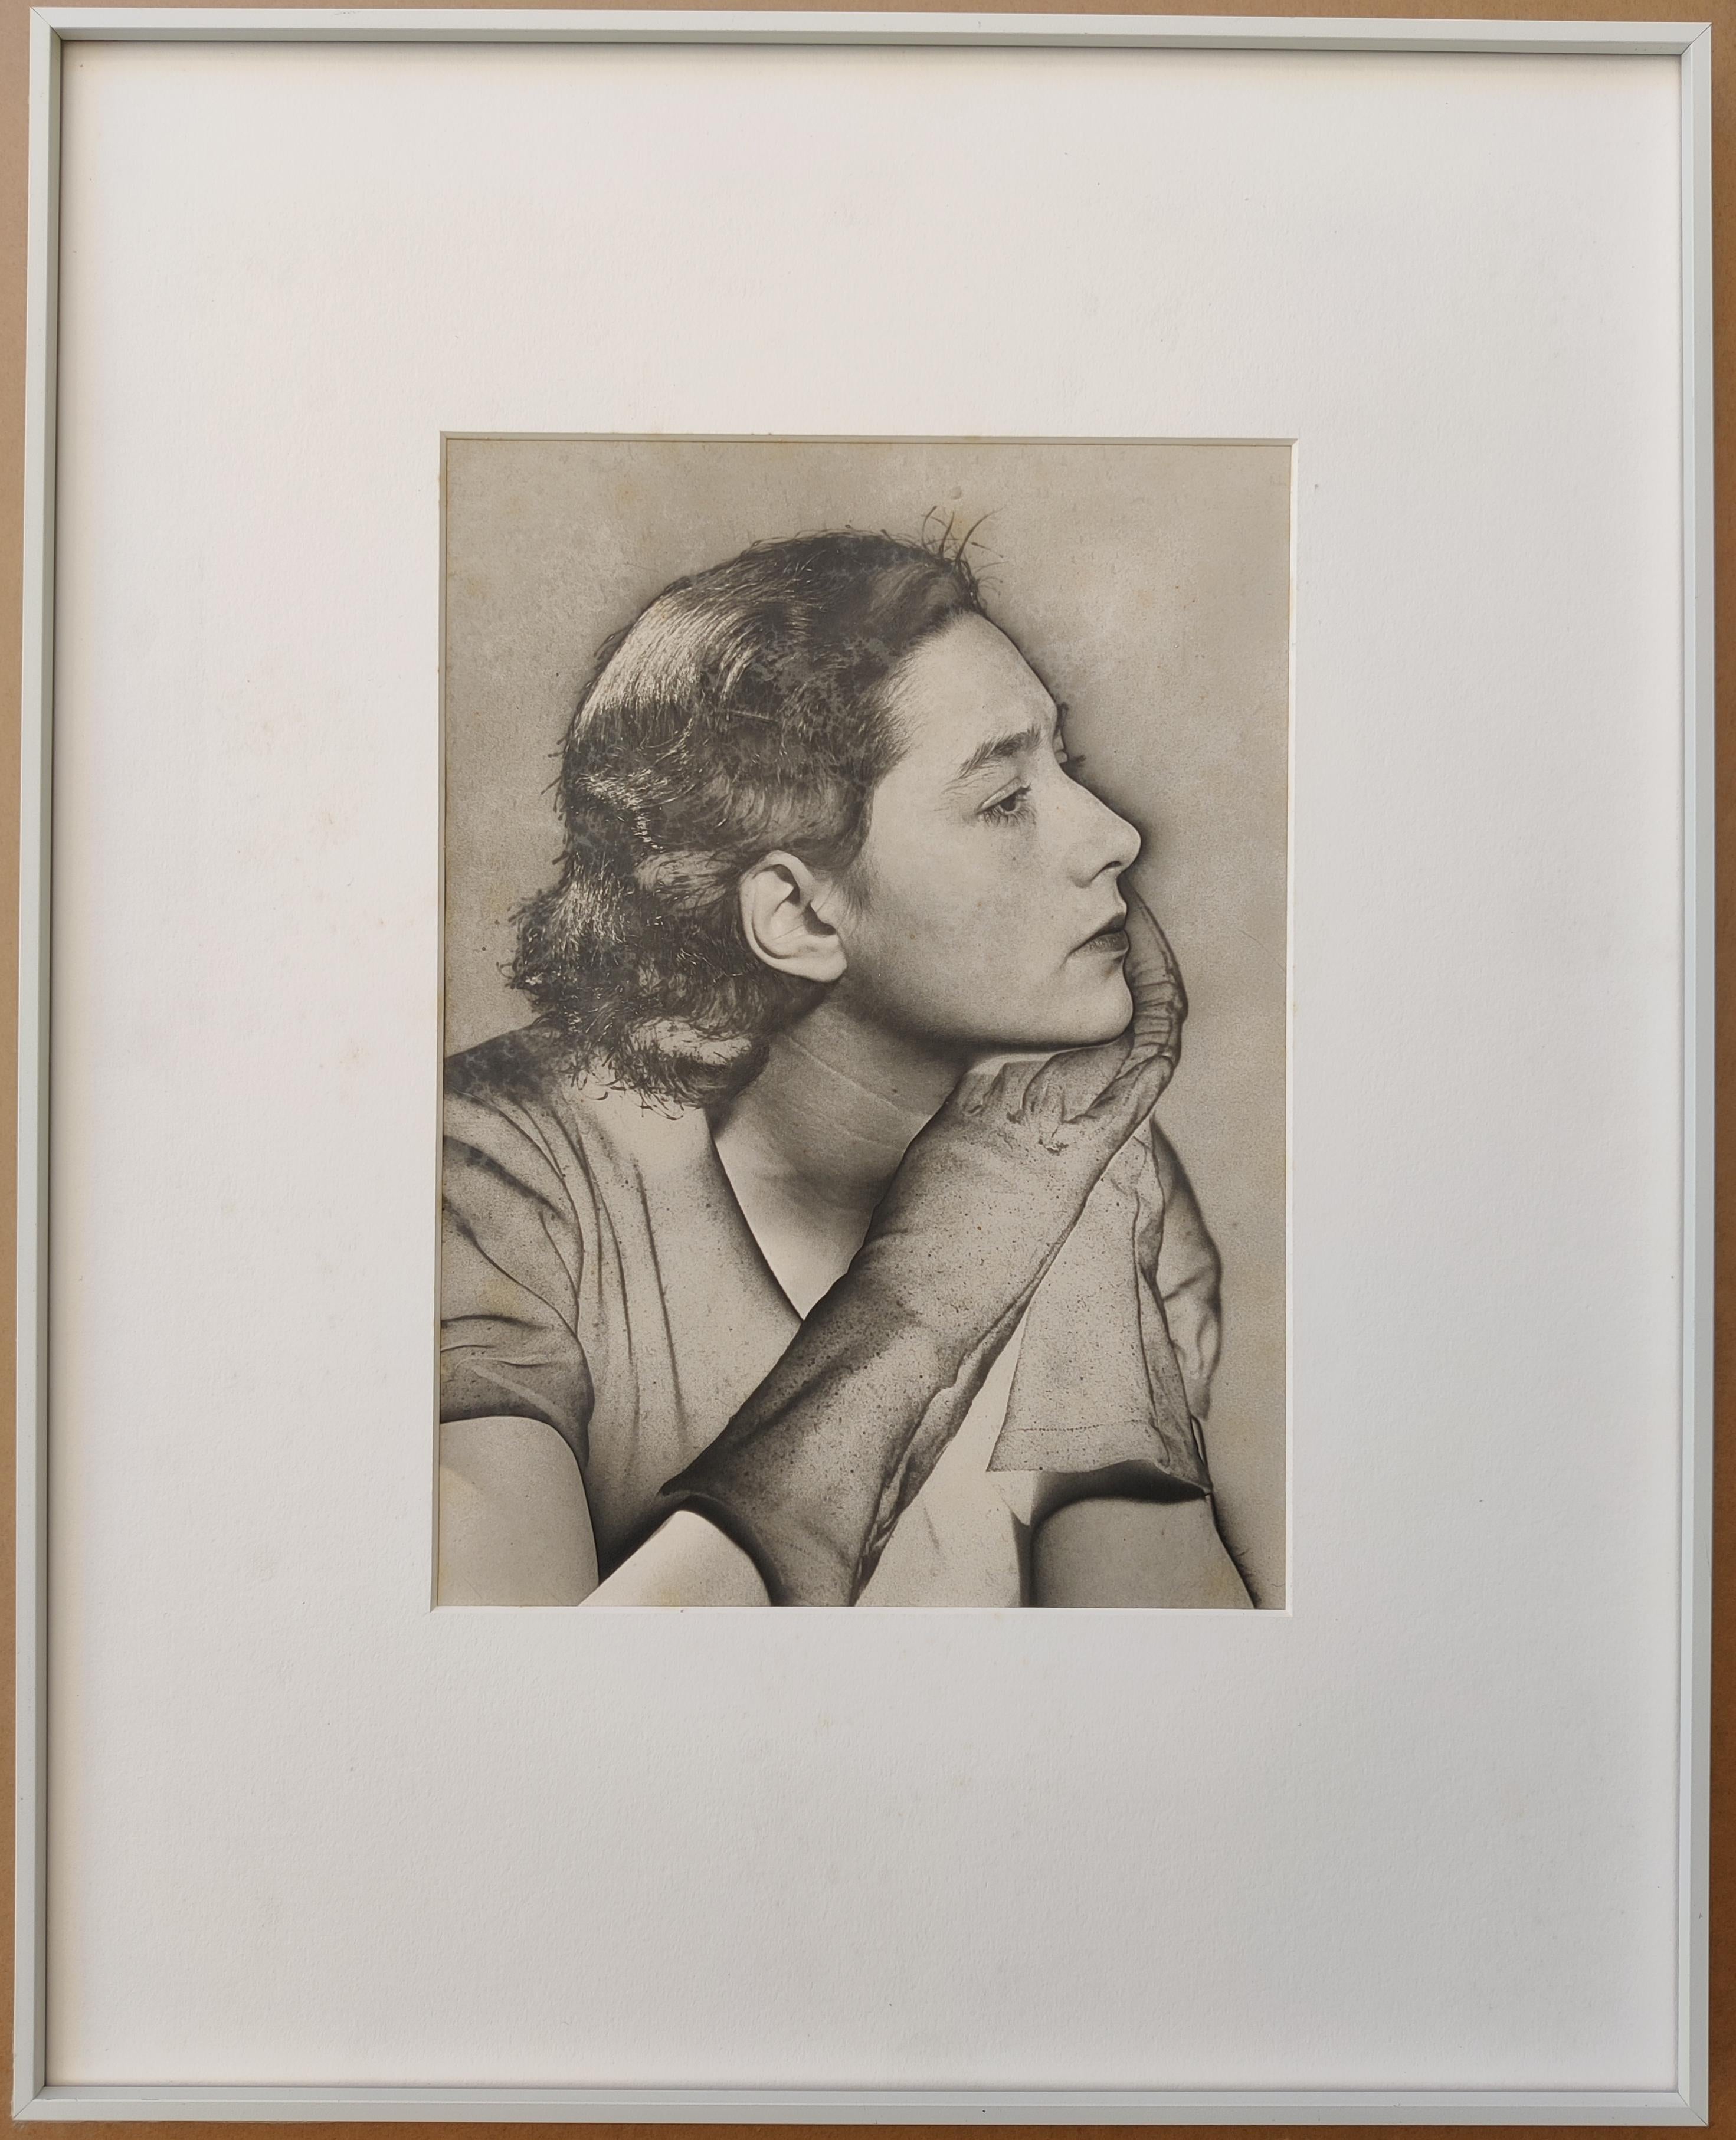 Man Ray
Femmes # 20, 1930S
Gelatin silver print, printed in 1981 by Paolo Vandrasch with the supervision of Juliette Man Ray
Photo size 30 x 22 cm
Frame size 51.3 x 41.2 x 2.5 cm
Edition 17 of 35
Caption label signed in black ink by Paolo Vandrasch